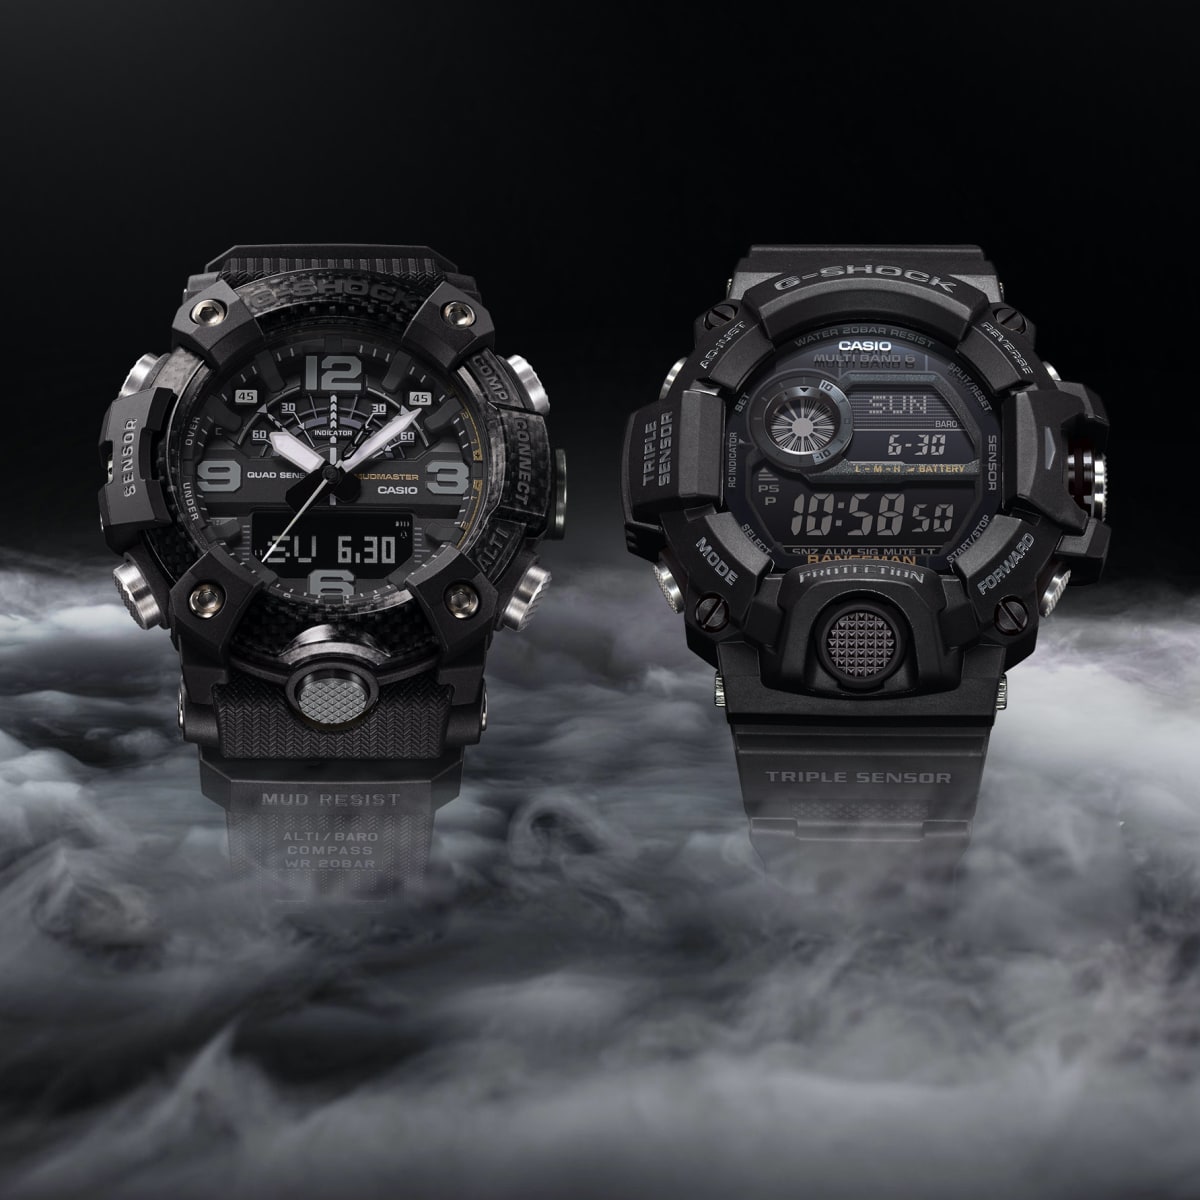 G-Shock releases Blackout versions of the Mudmaster and Rangeman